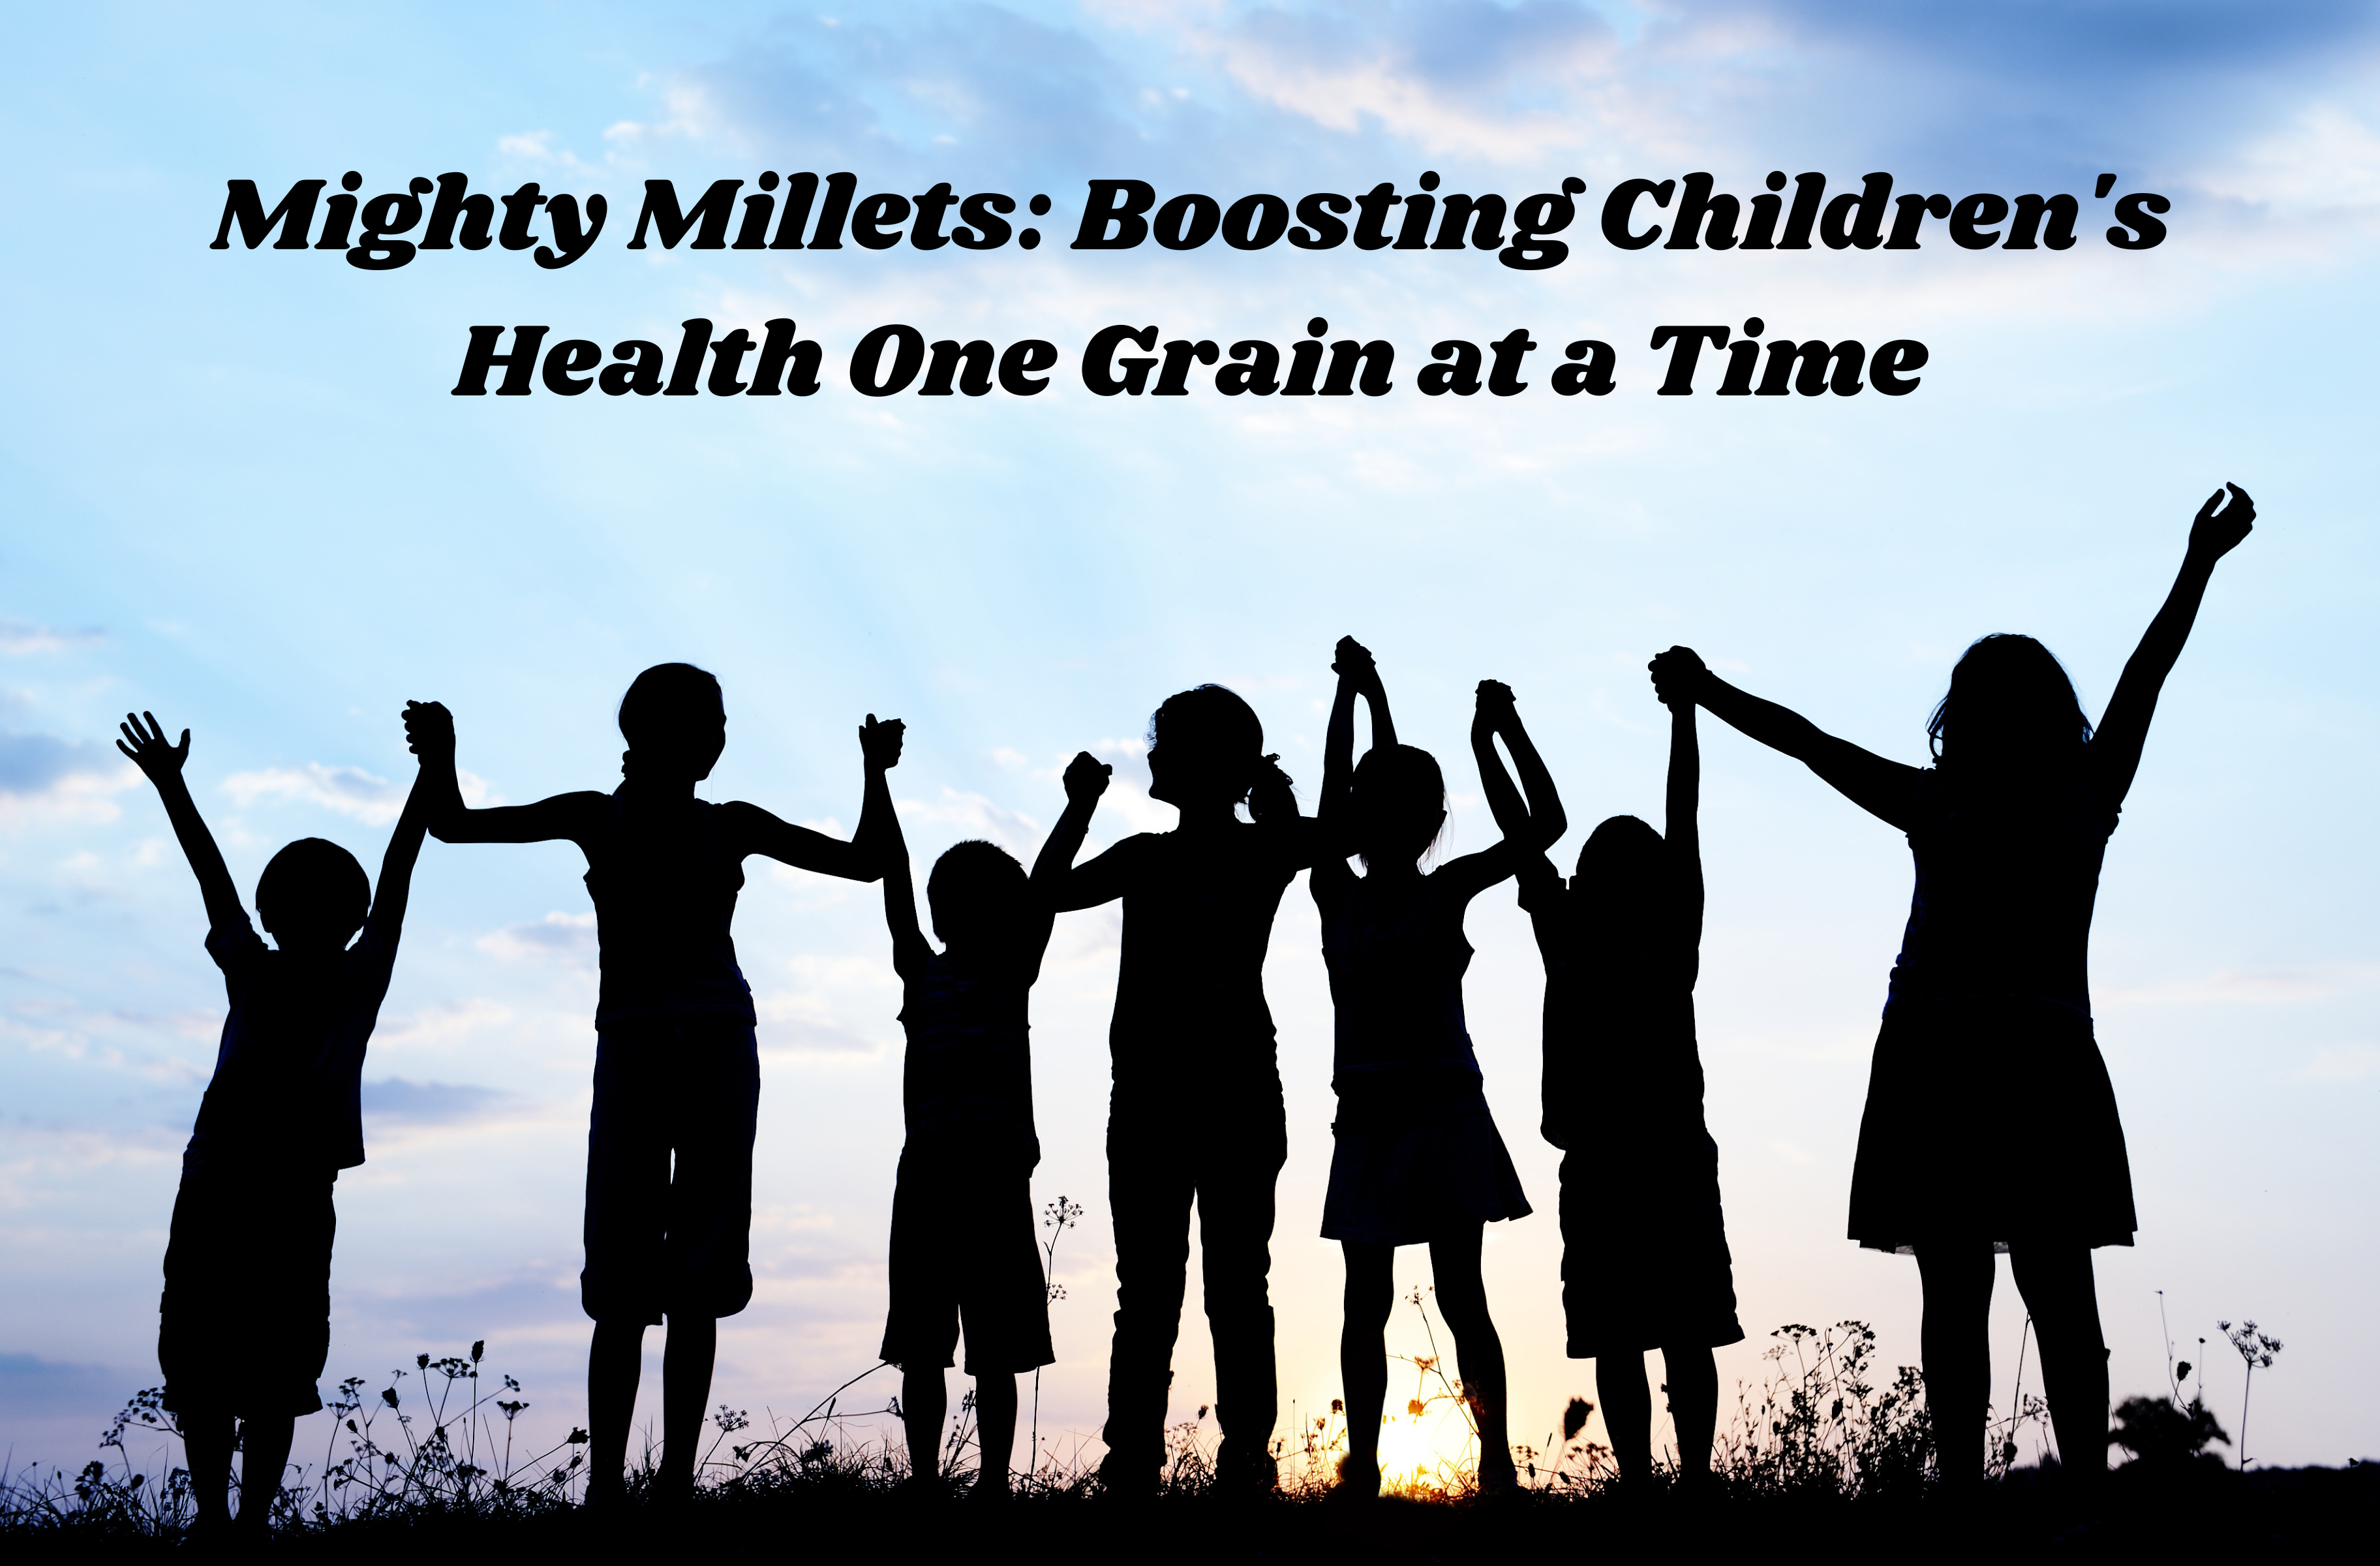 Mighty Millets: Boosting Children’s Health One Grain at a Time